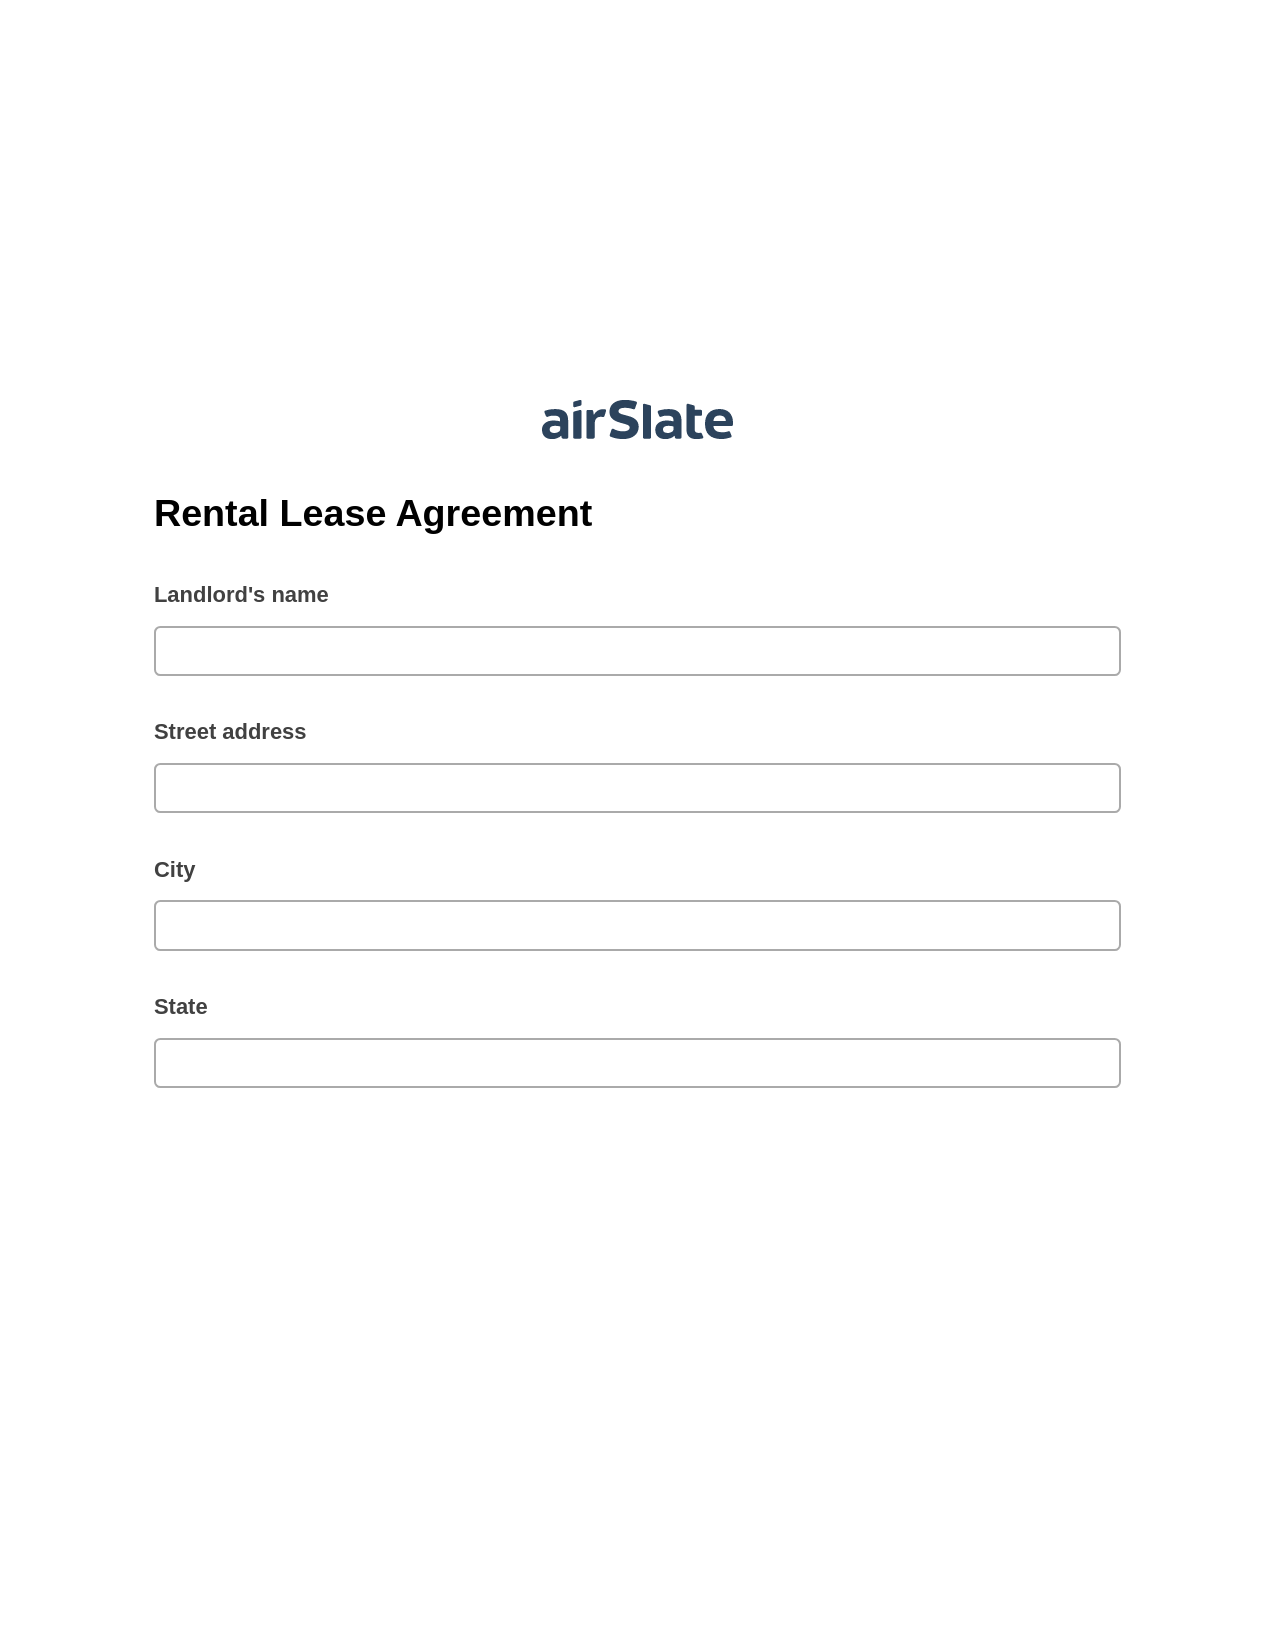 Rental Lease Agreement Pre-fill Slate from MS Dynamics 365 Records Bot, Create Slate every Google Sheet Update Bot, Export to Google Sheet Bot